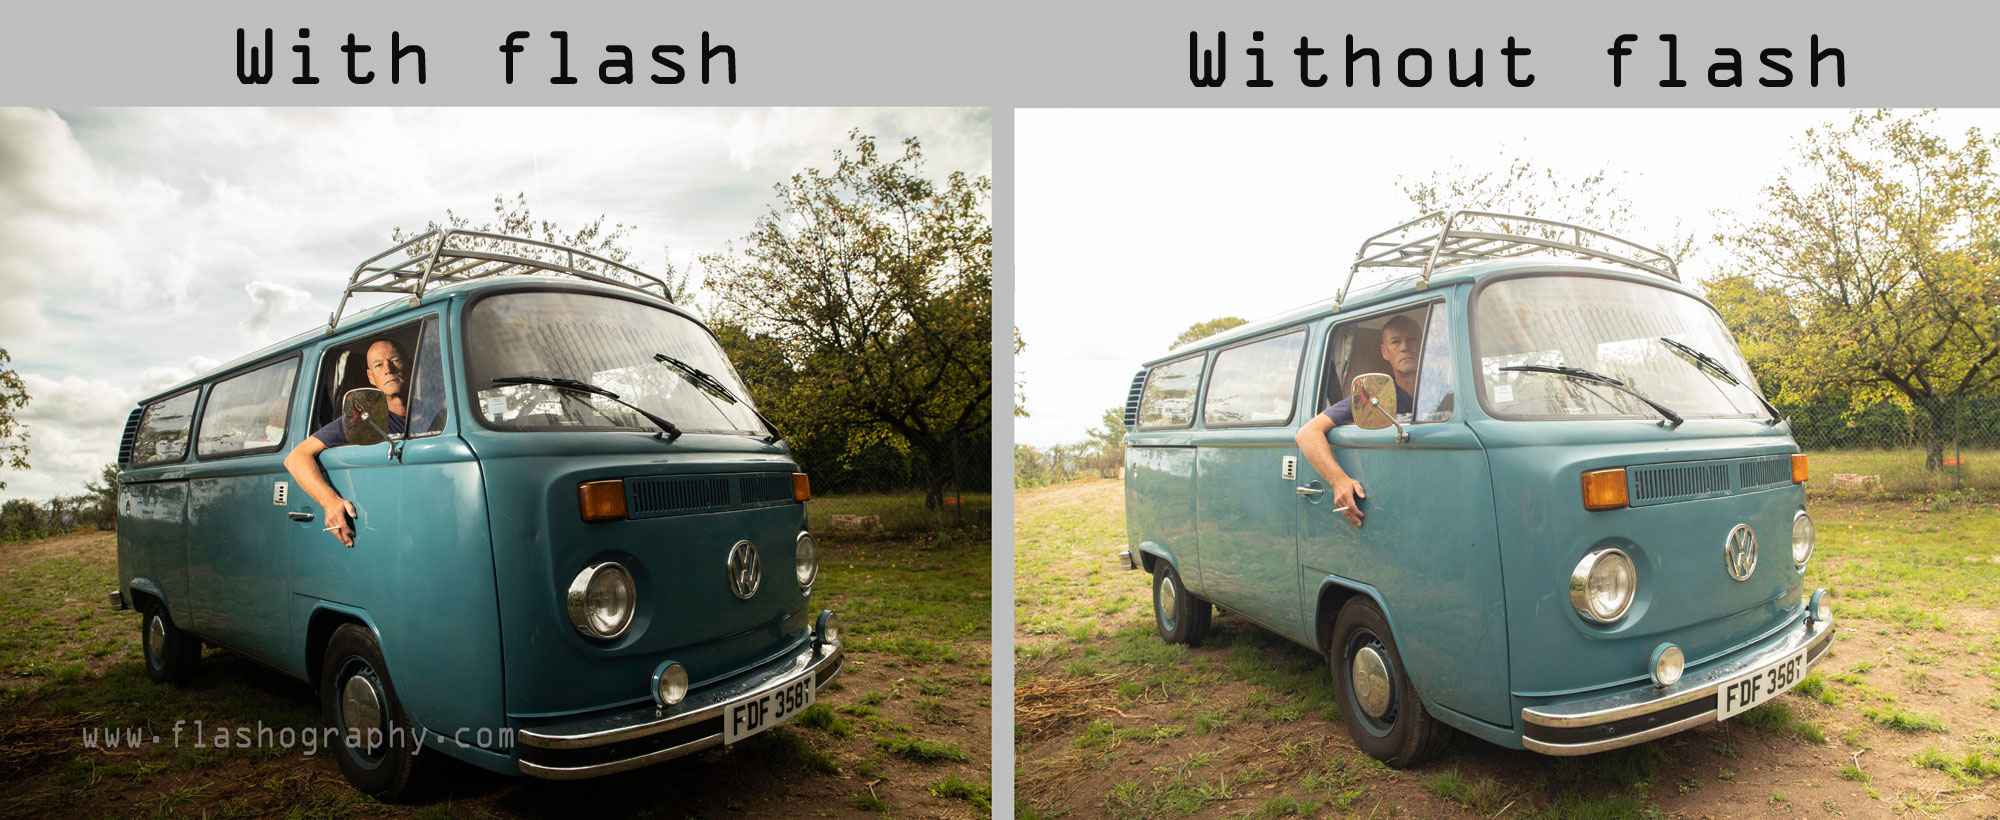 VW van with and without flash